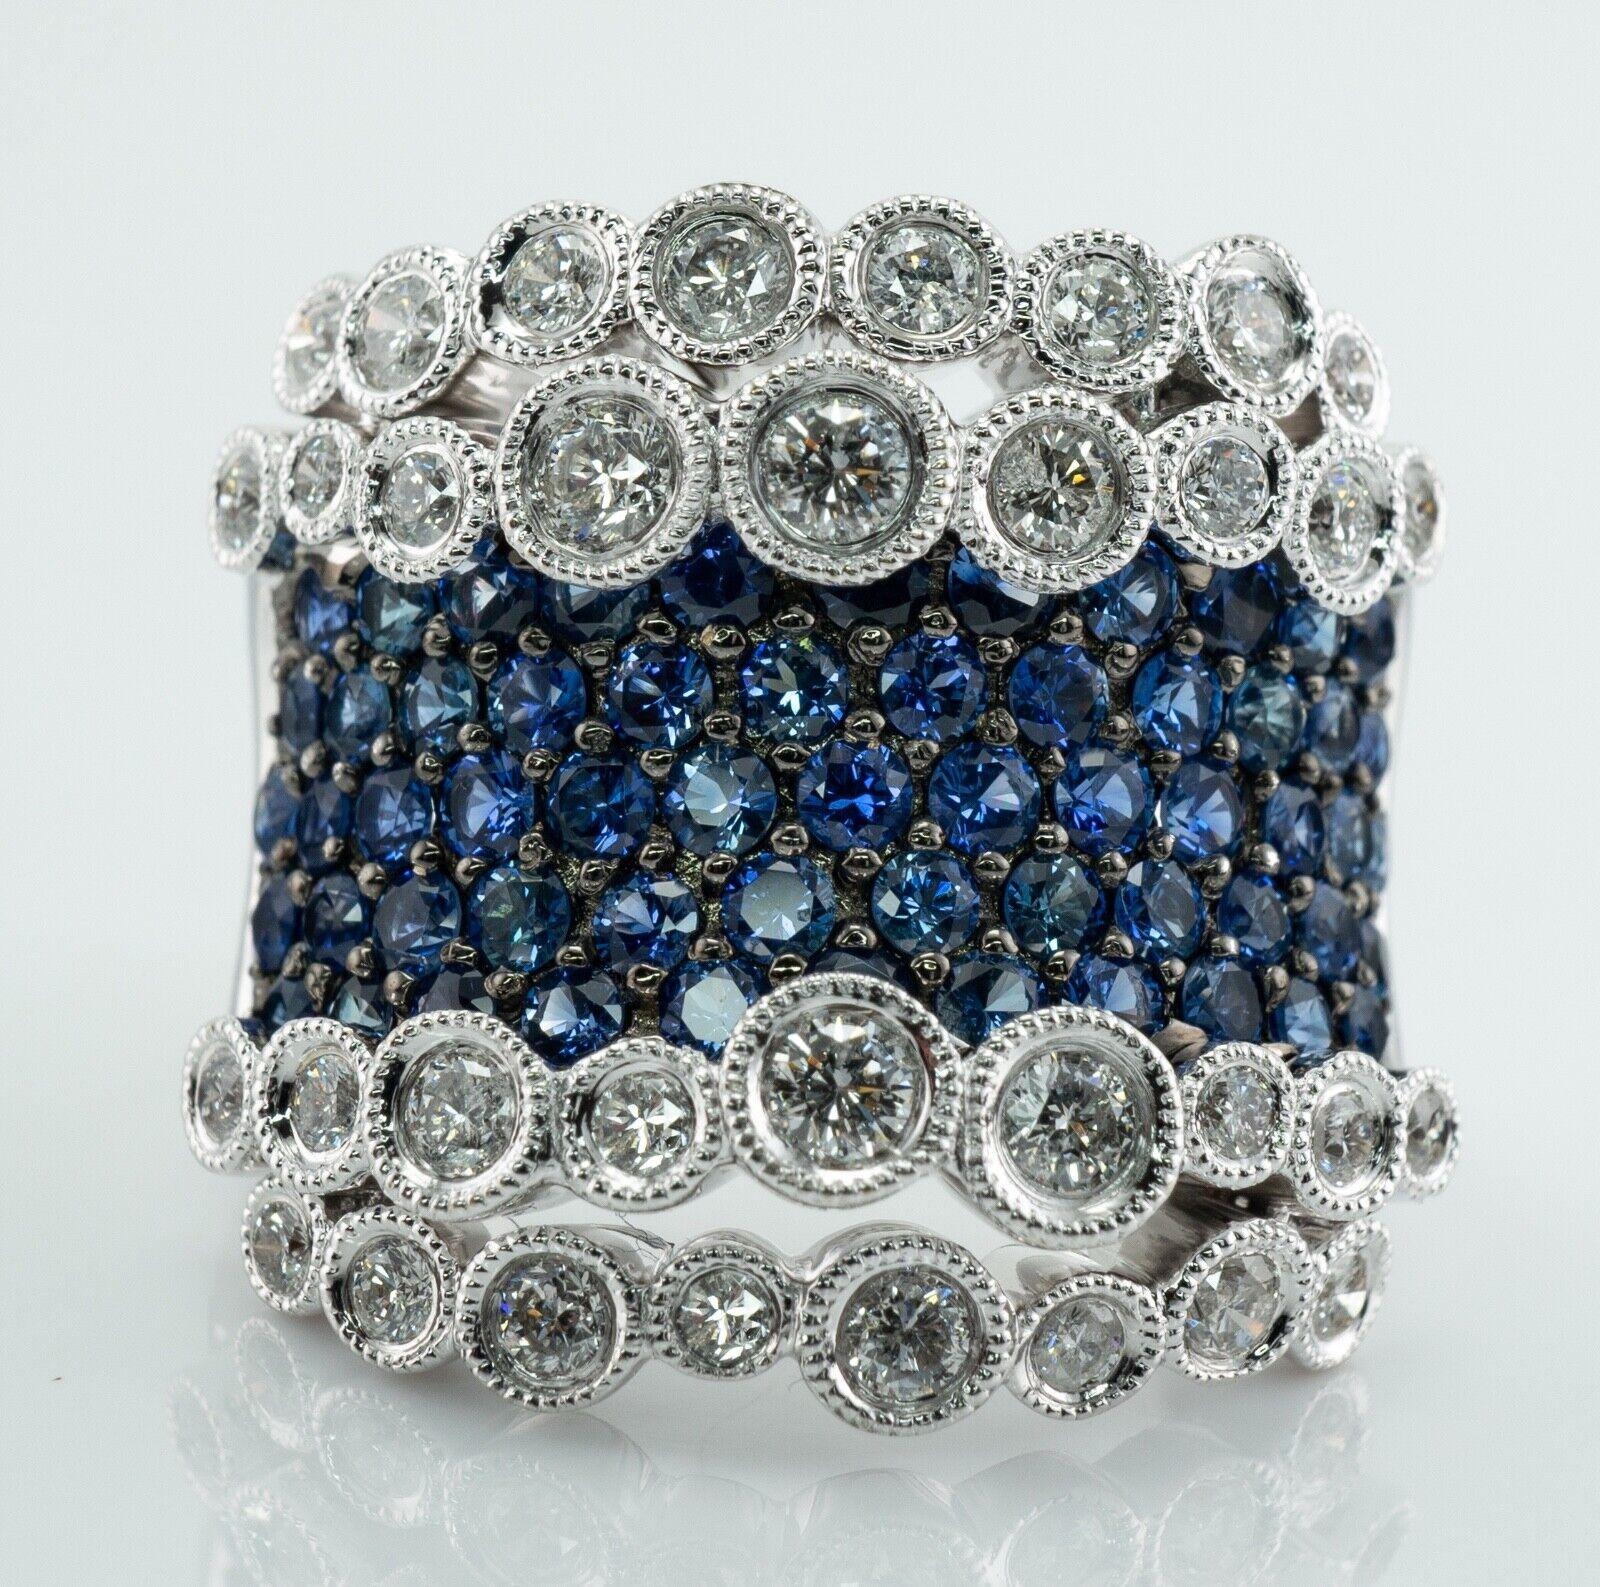 Diamond Sapphire Ring 18K White Gold Wide Band

This amazing showstopper ring is crafted in solid 18K White Gold.
There are genuine Earth mined 59 round cut sapphires, 2mm each = 2.95 carats total weight.
34 round brilliant cut diamonds graduate